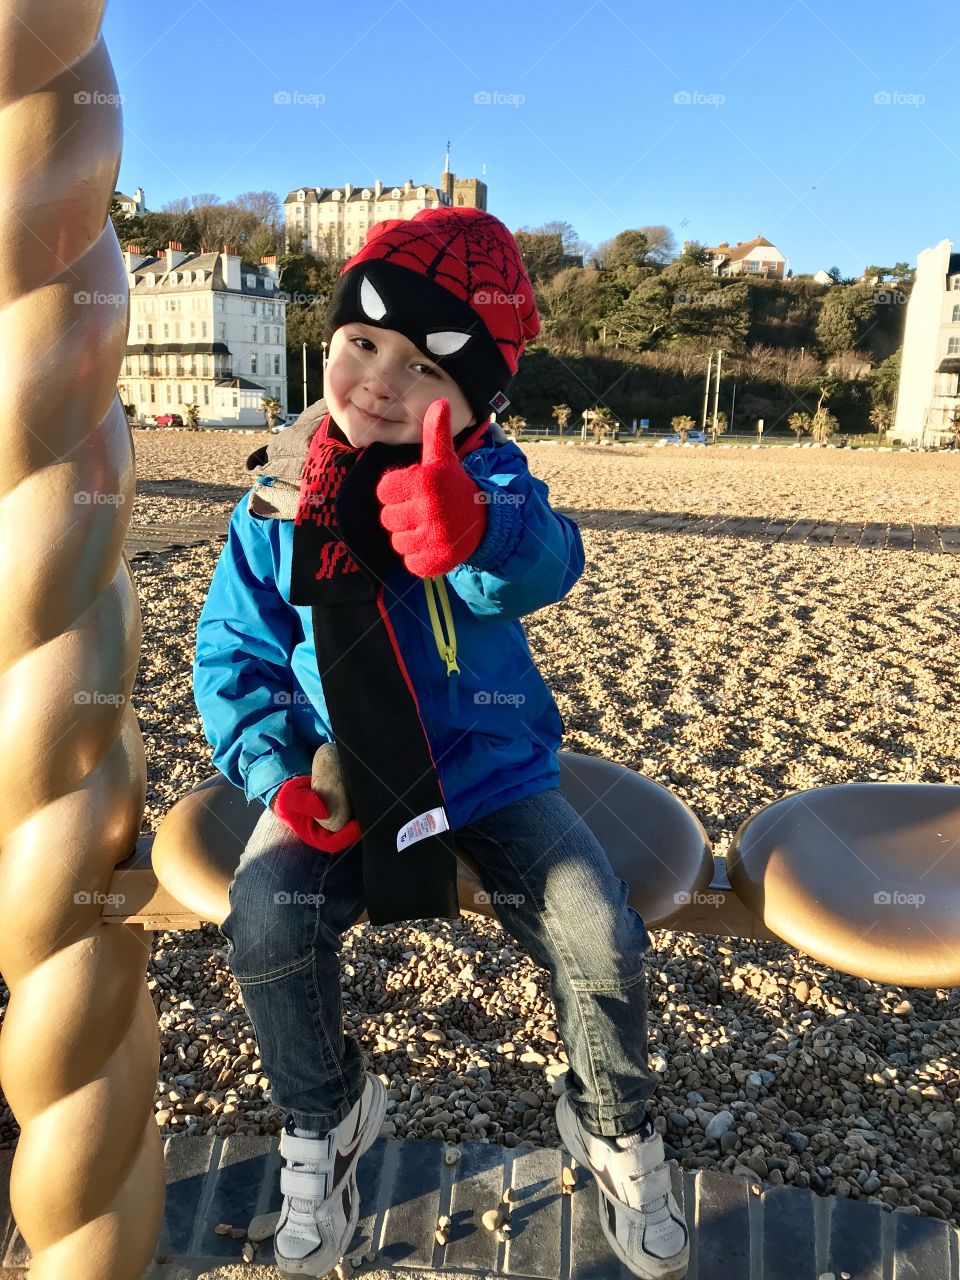 Happy little boy giving a thumbs up on a pebbled beach on a brisk winter’s day